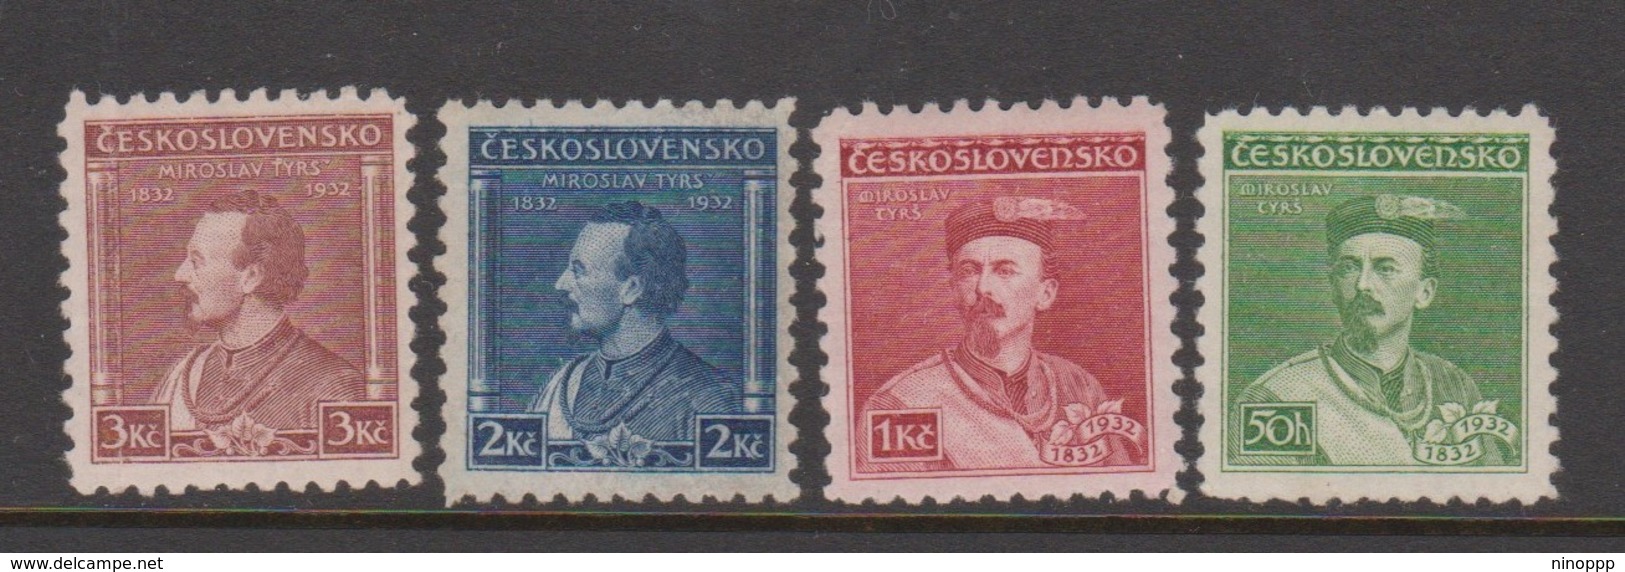 Czechoslovakia SG 320-323 1932 Birth Centenary Of Dr Tyrs ,mint Hinged - Used Stamps